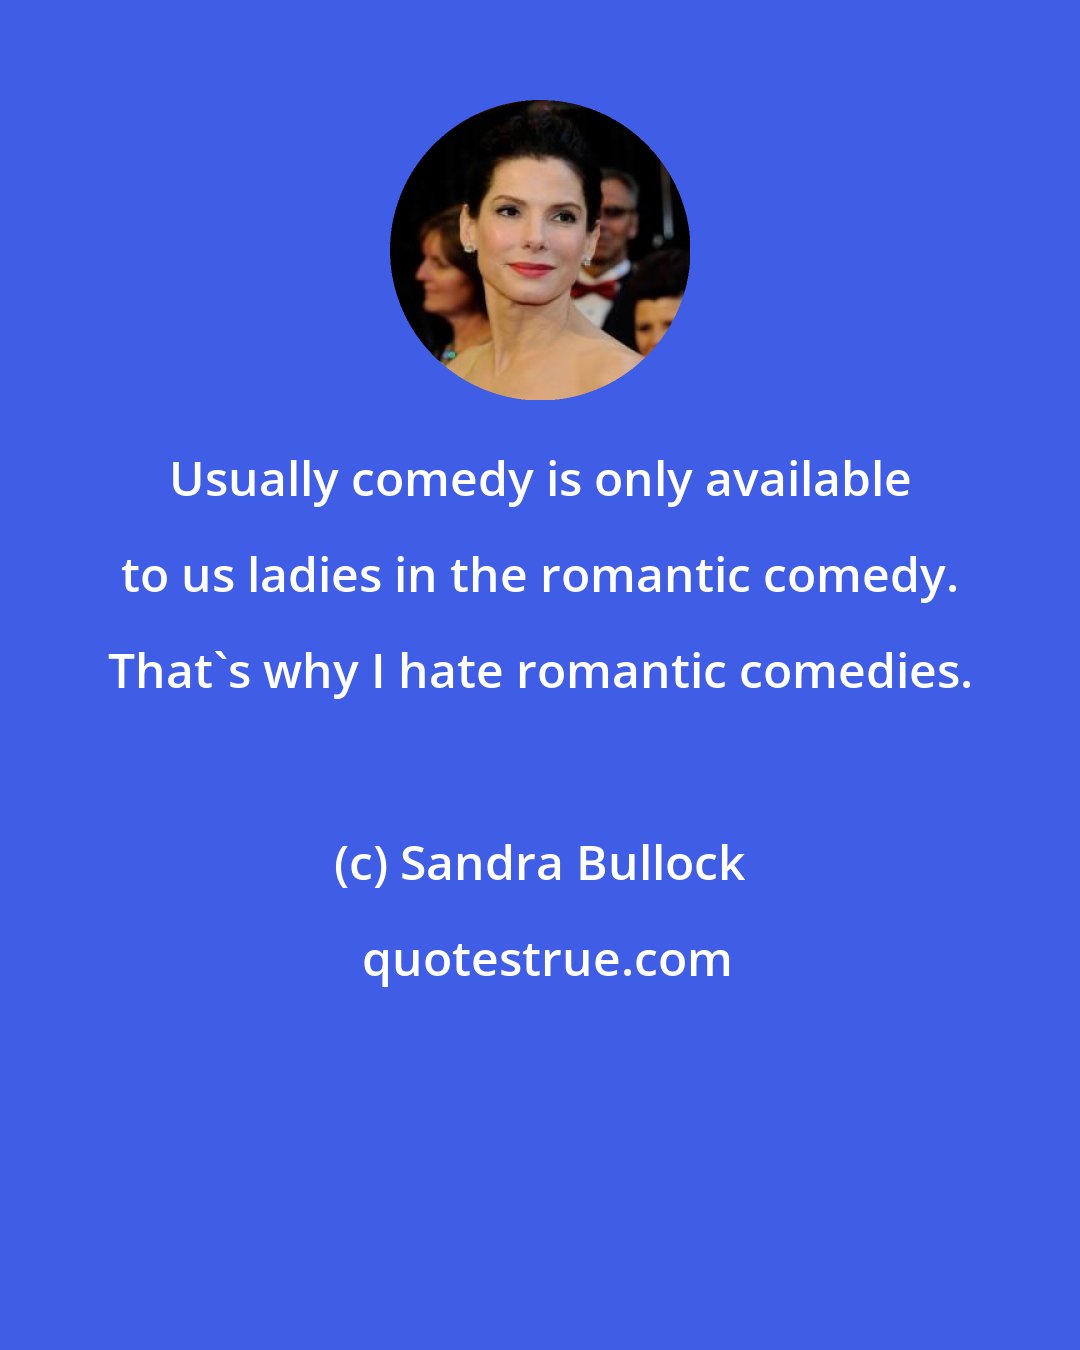 Sandra Bullock: Usually comedy is only available to us ladies in the romantic comedy. That's why I hate romantic comedies.